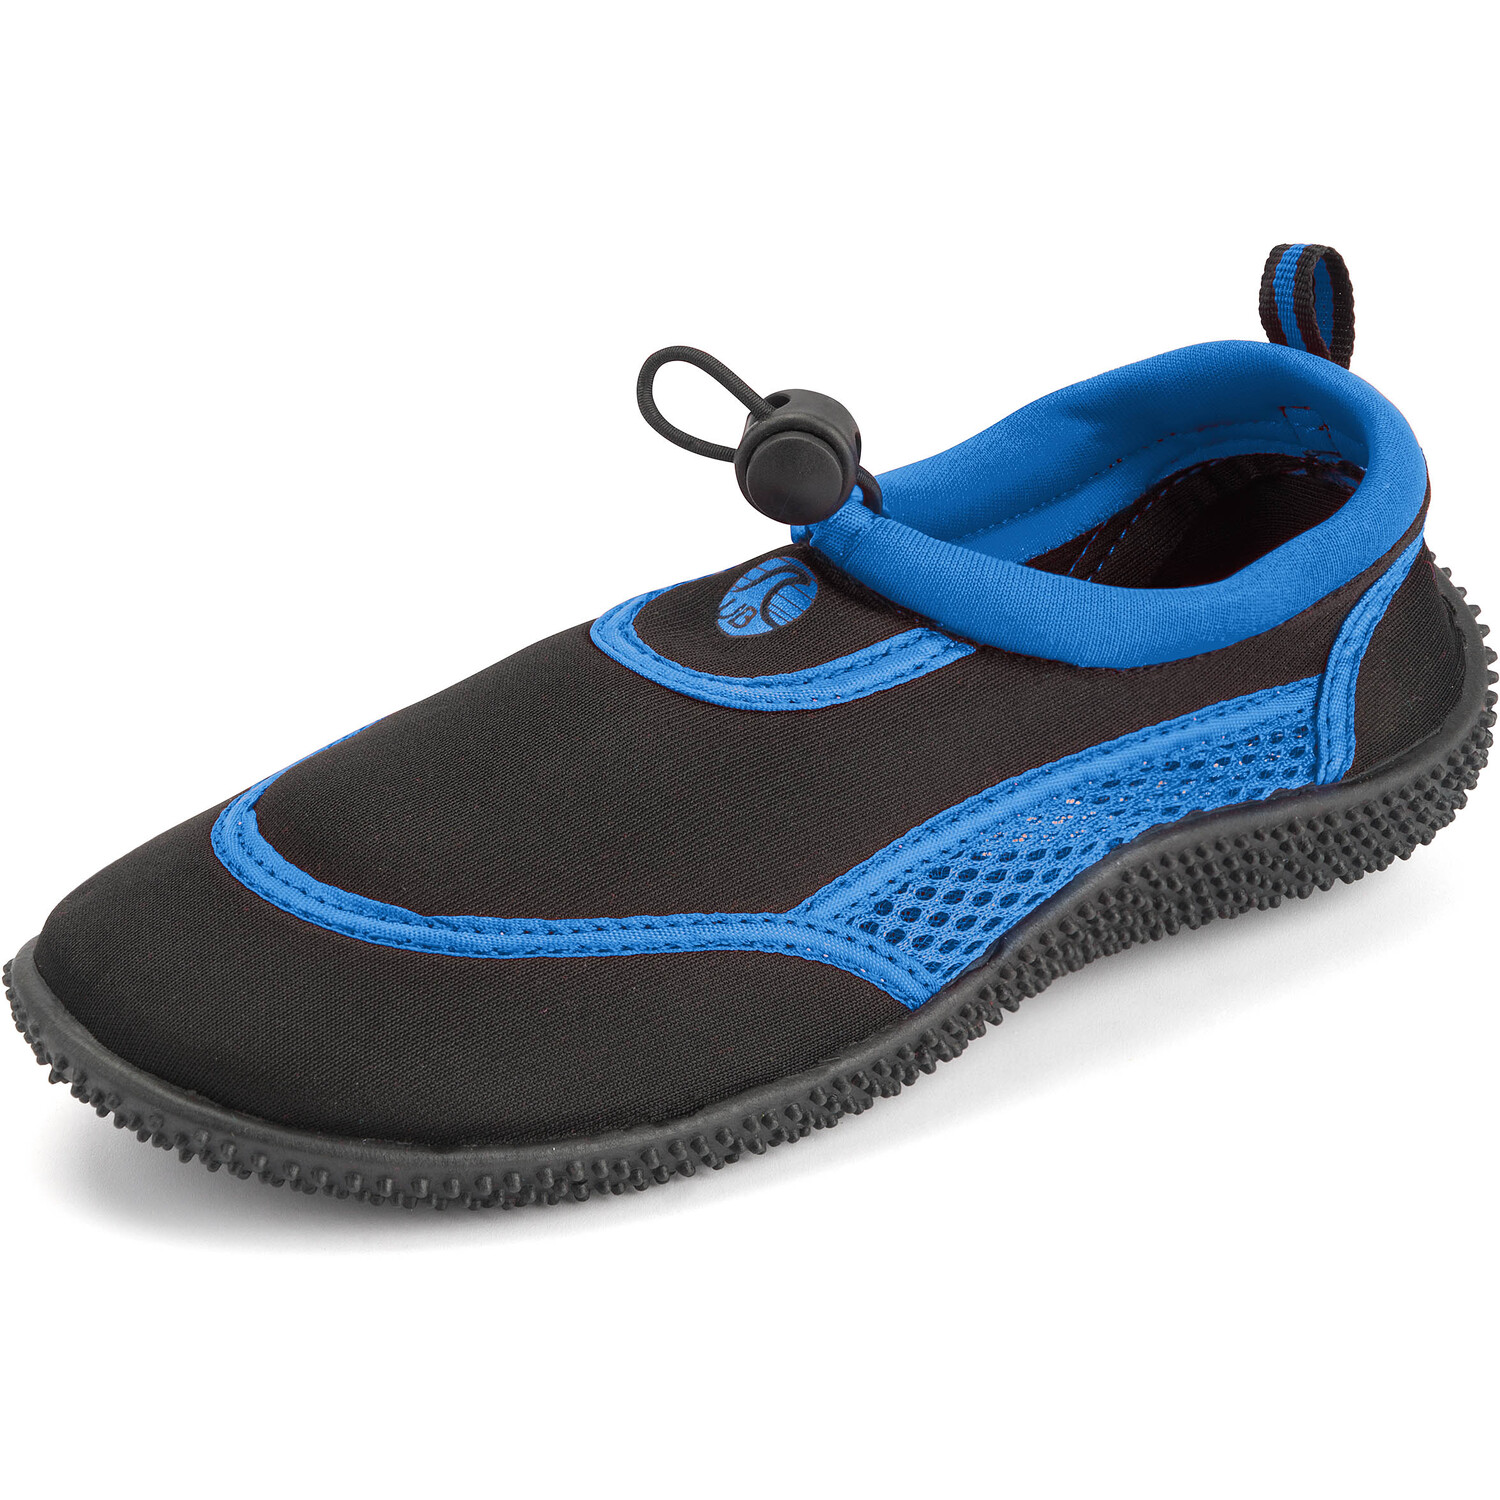 Toggle Kids Water Shoes - Blue Image 5